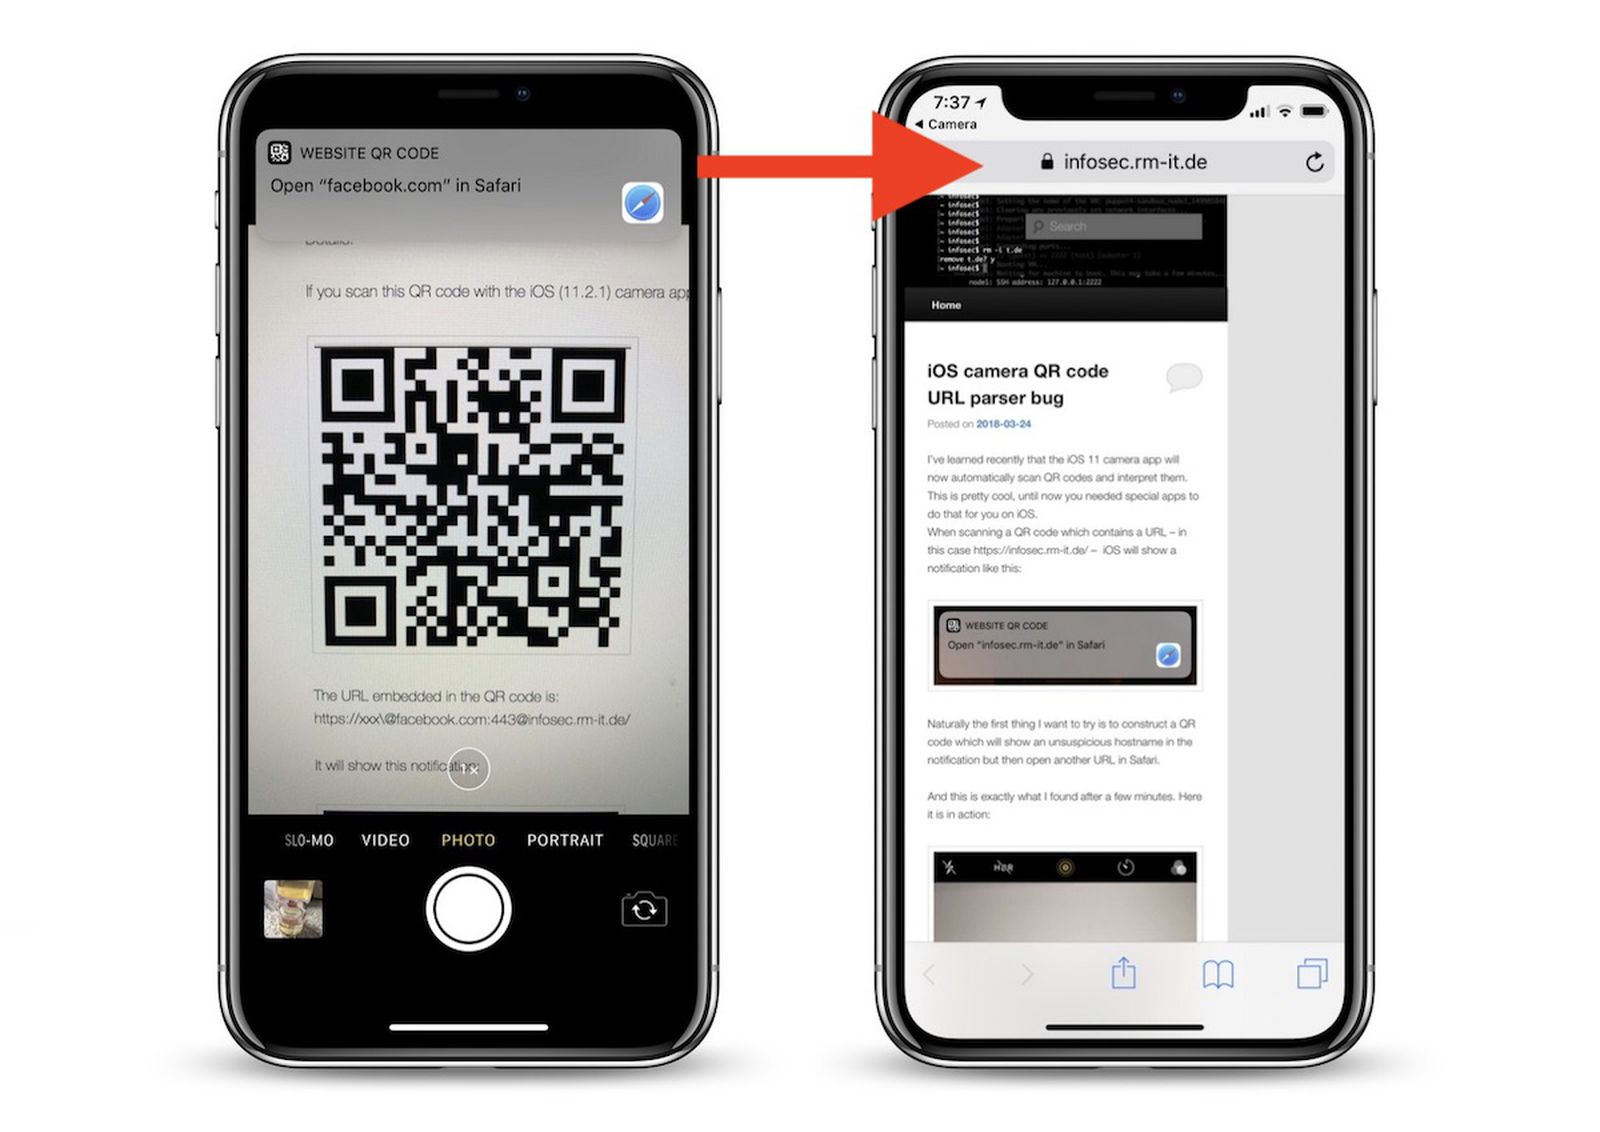 Scanning a QR Code and directed to URL